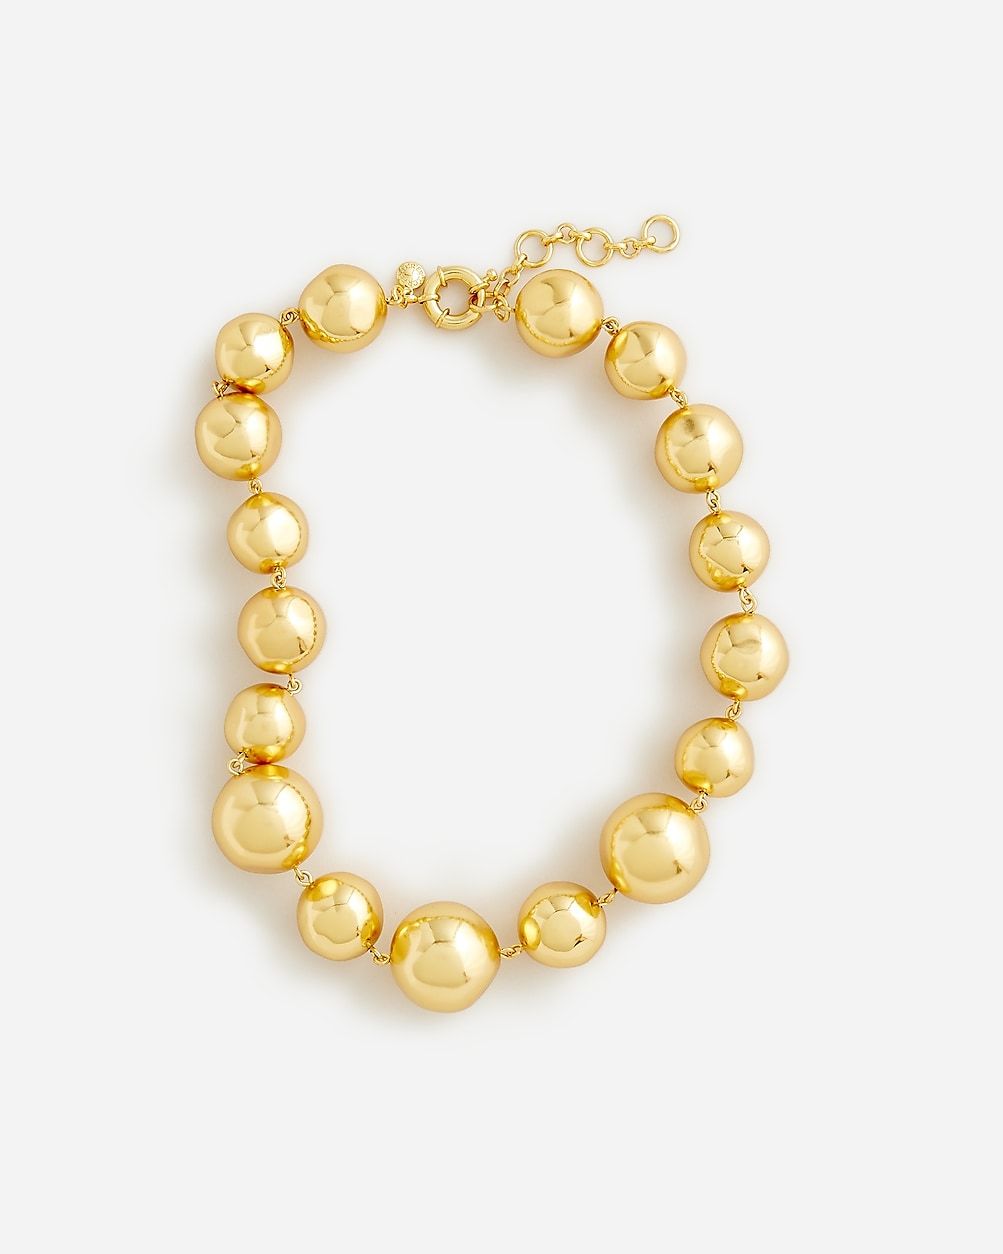 top rated4.7(10 REVIEWS)Oversized metallic-ball necklace$29.50$49.50 (40% Off)Limited time. Price... | J.Crew US